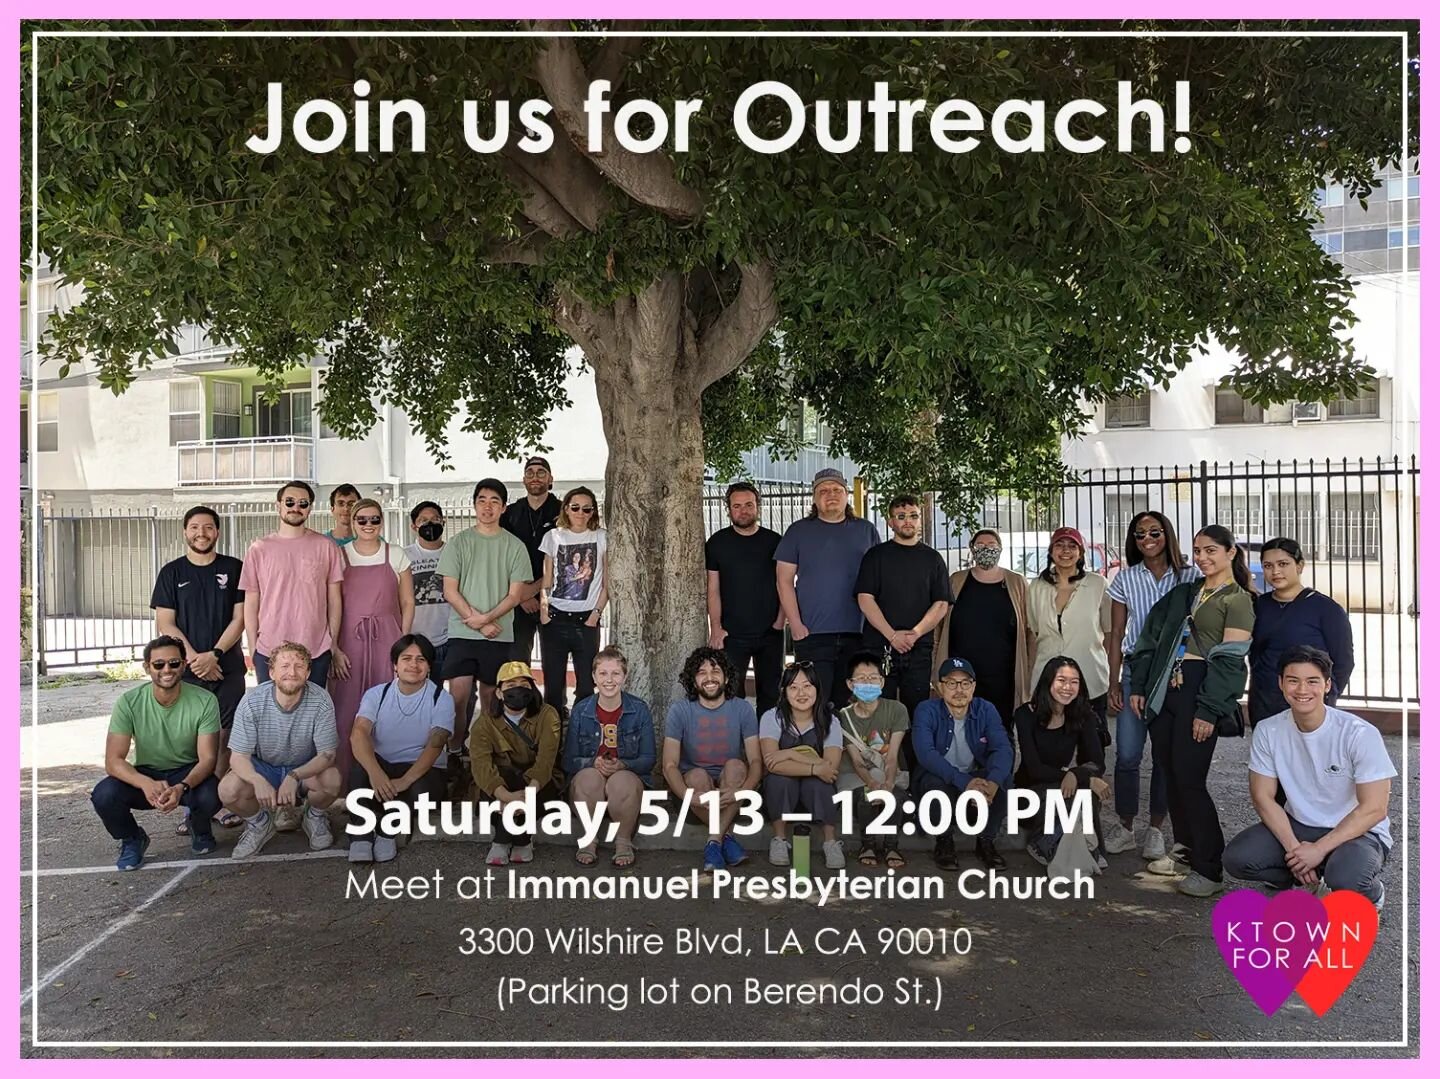 Join us for outreach tomorrow! We meet in the parking lot at Immanuel Presbyterian Church at noon. Free parking is available in the lot. We always go over best practices and if you're new we'll make sure you're in a group with experienced volunteers.